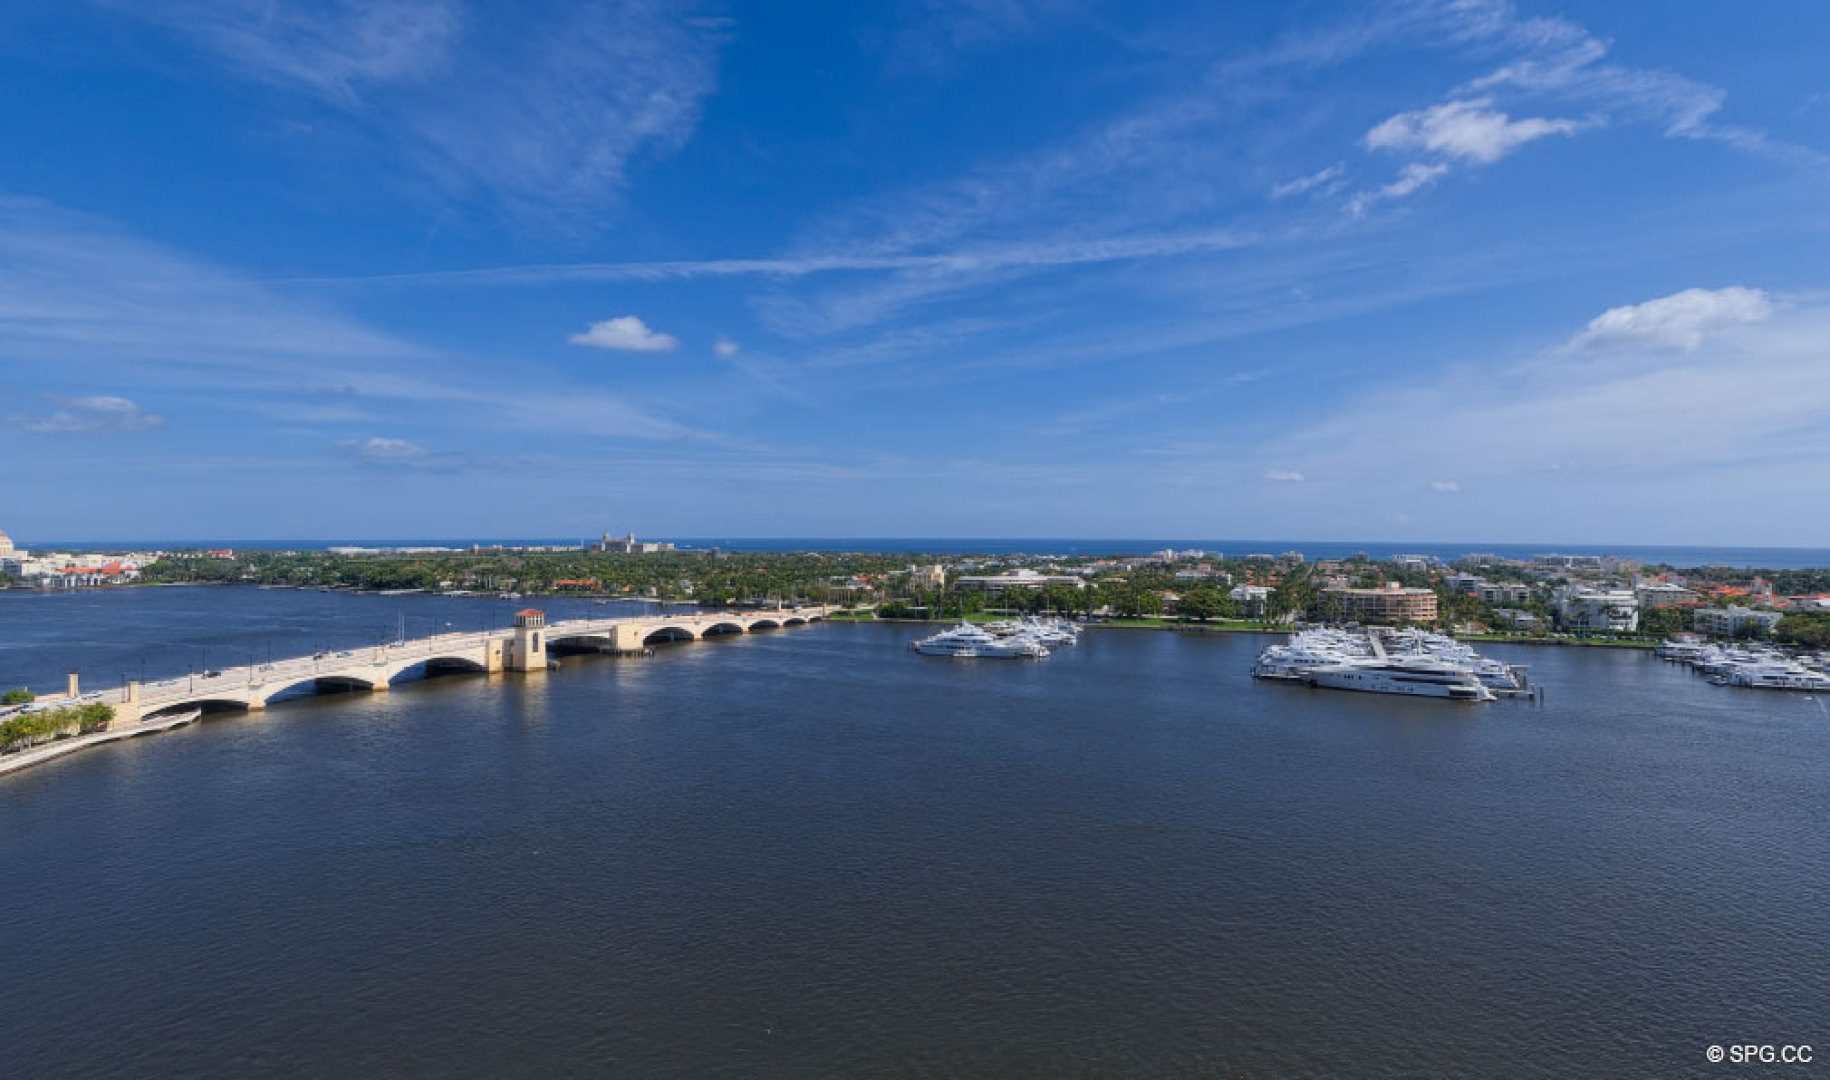 Eastern Views from The Bristol, Luxury Waterfront Condos in West Palm Beach, Florida 33401